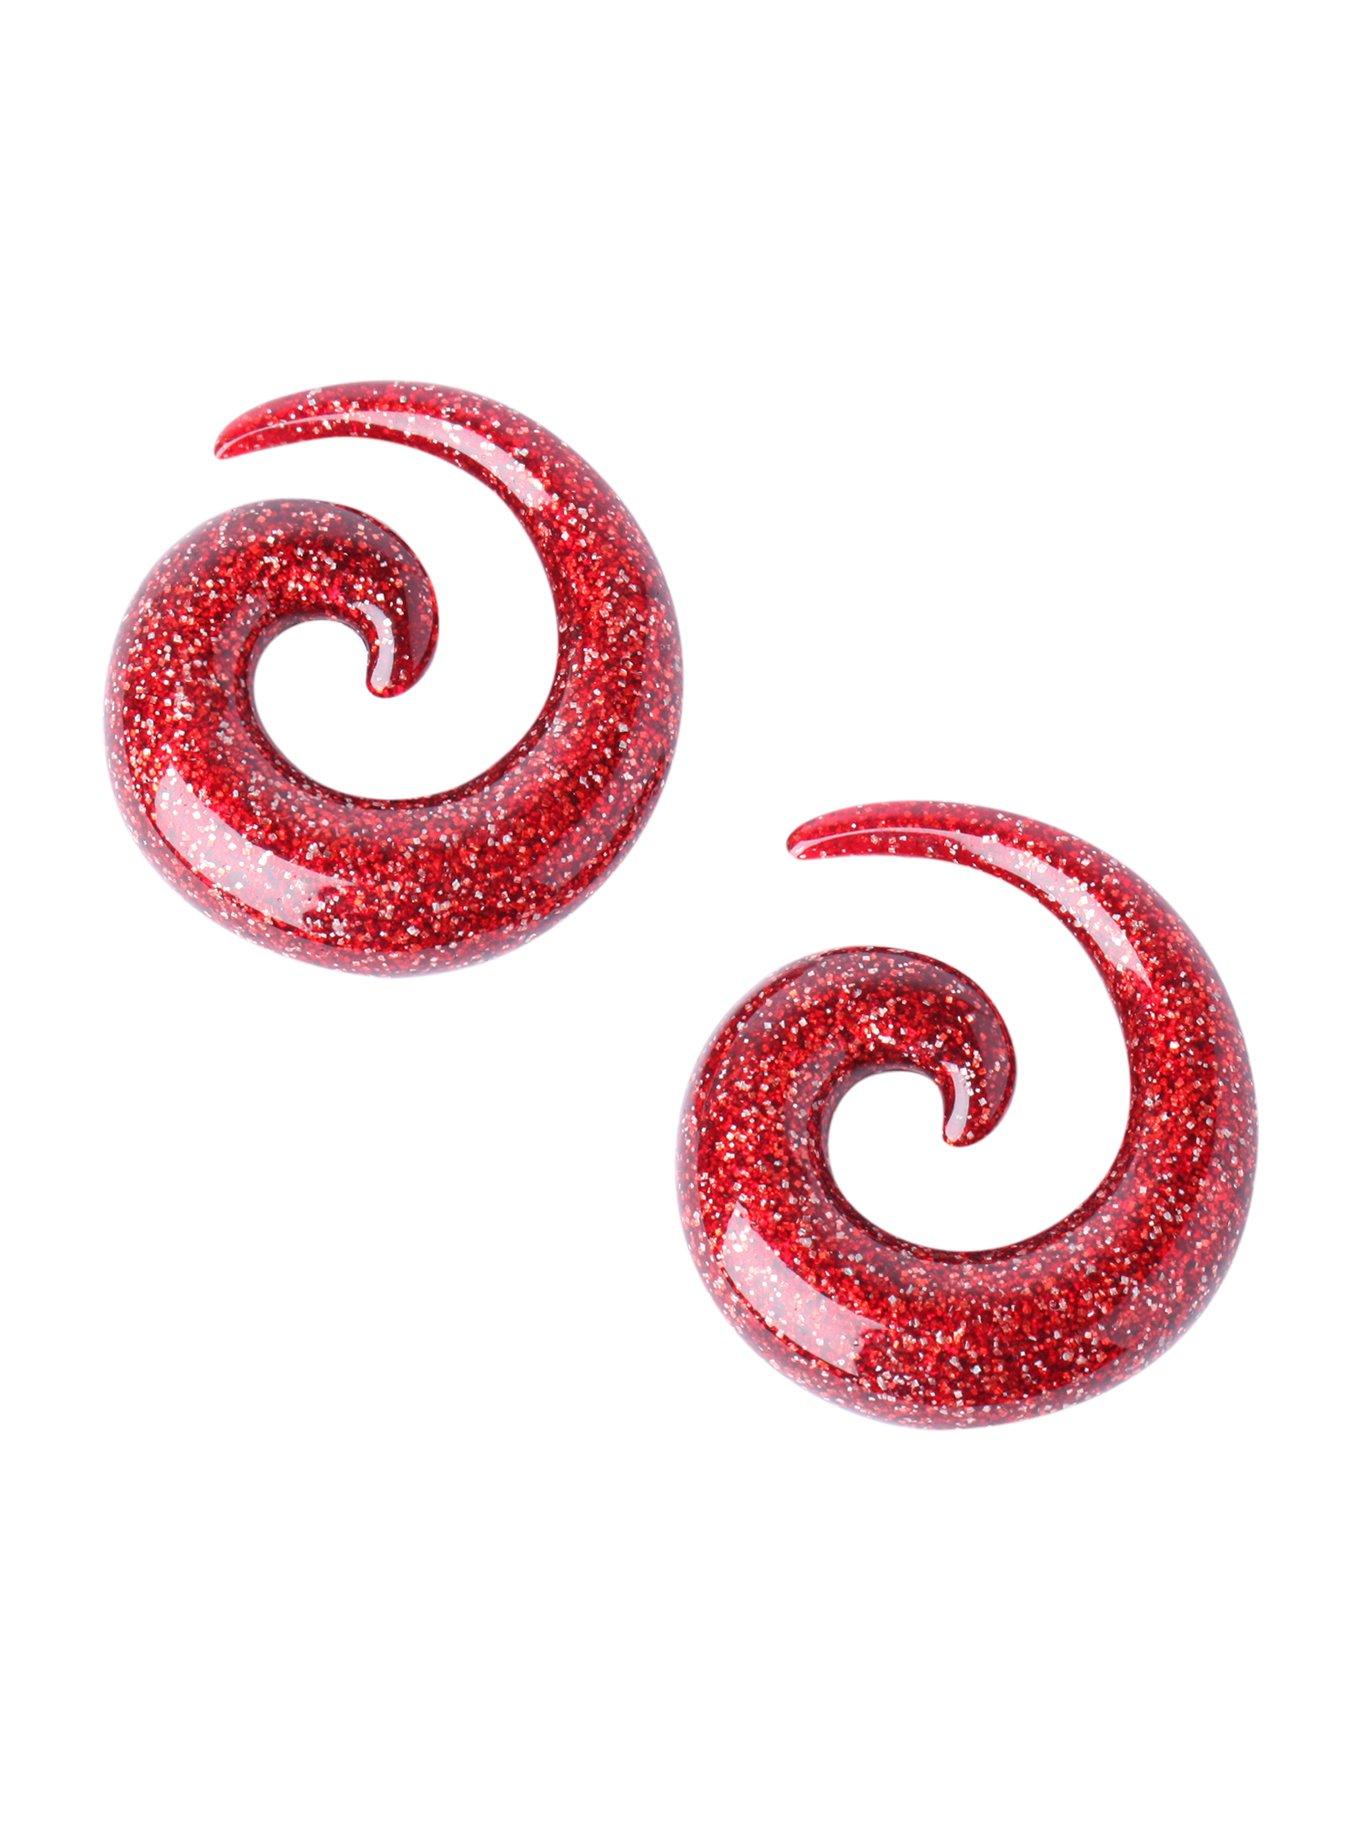 Acrylic Red Glitter Spiral Pincher 2 Pack, BLACK, hi-res